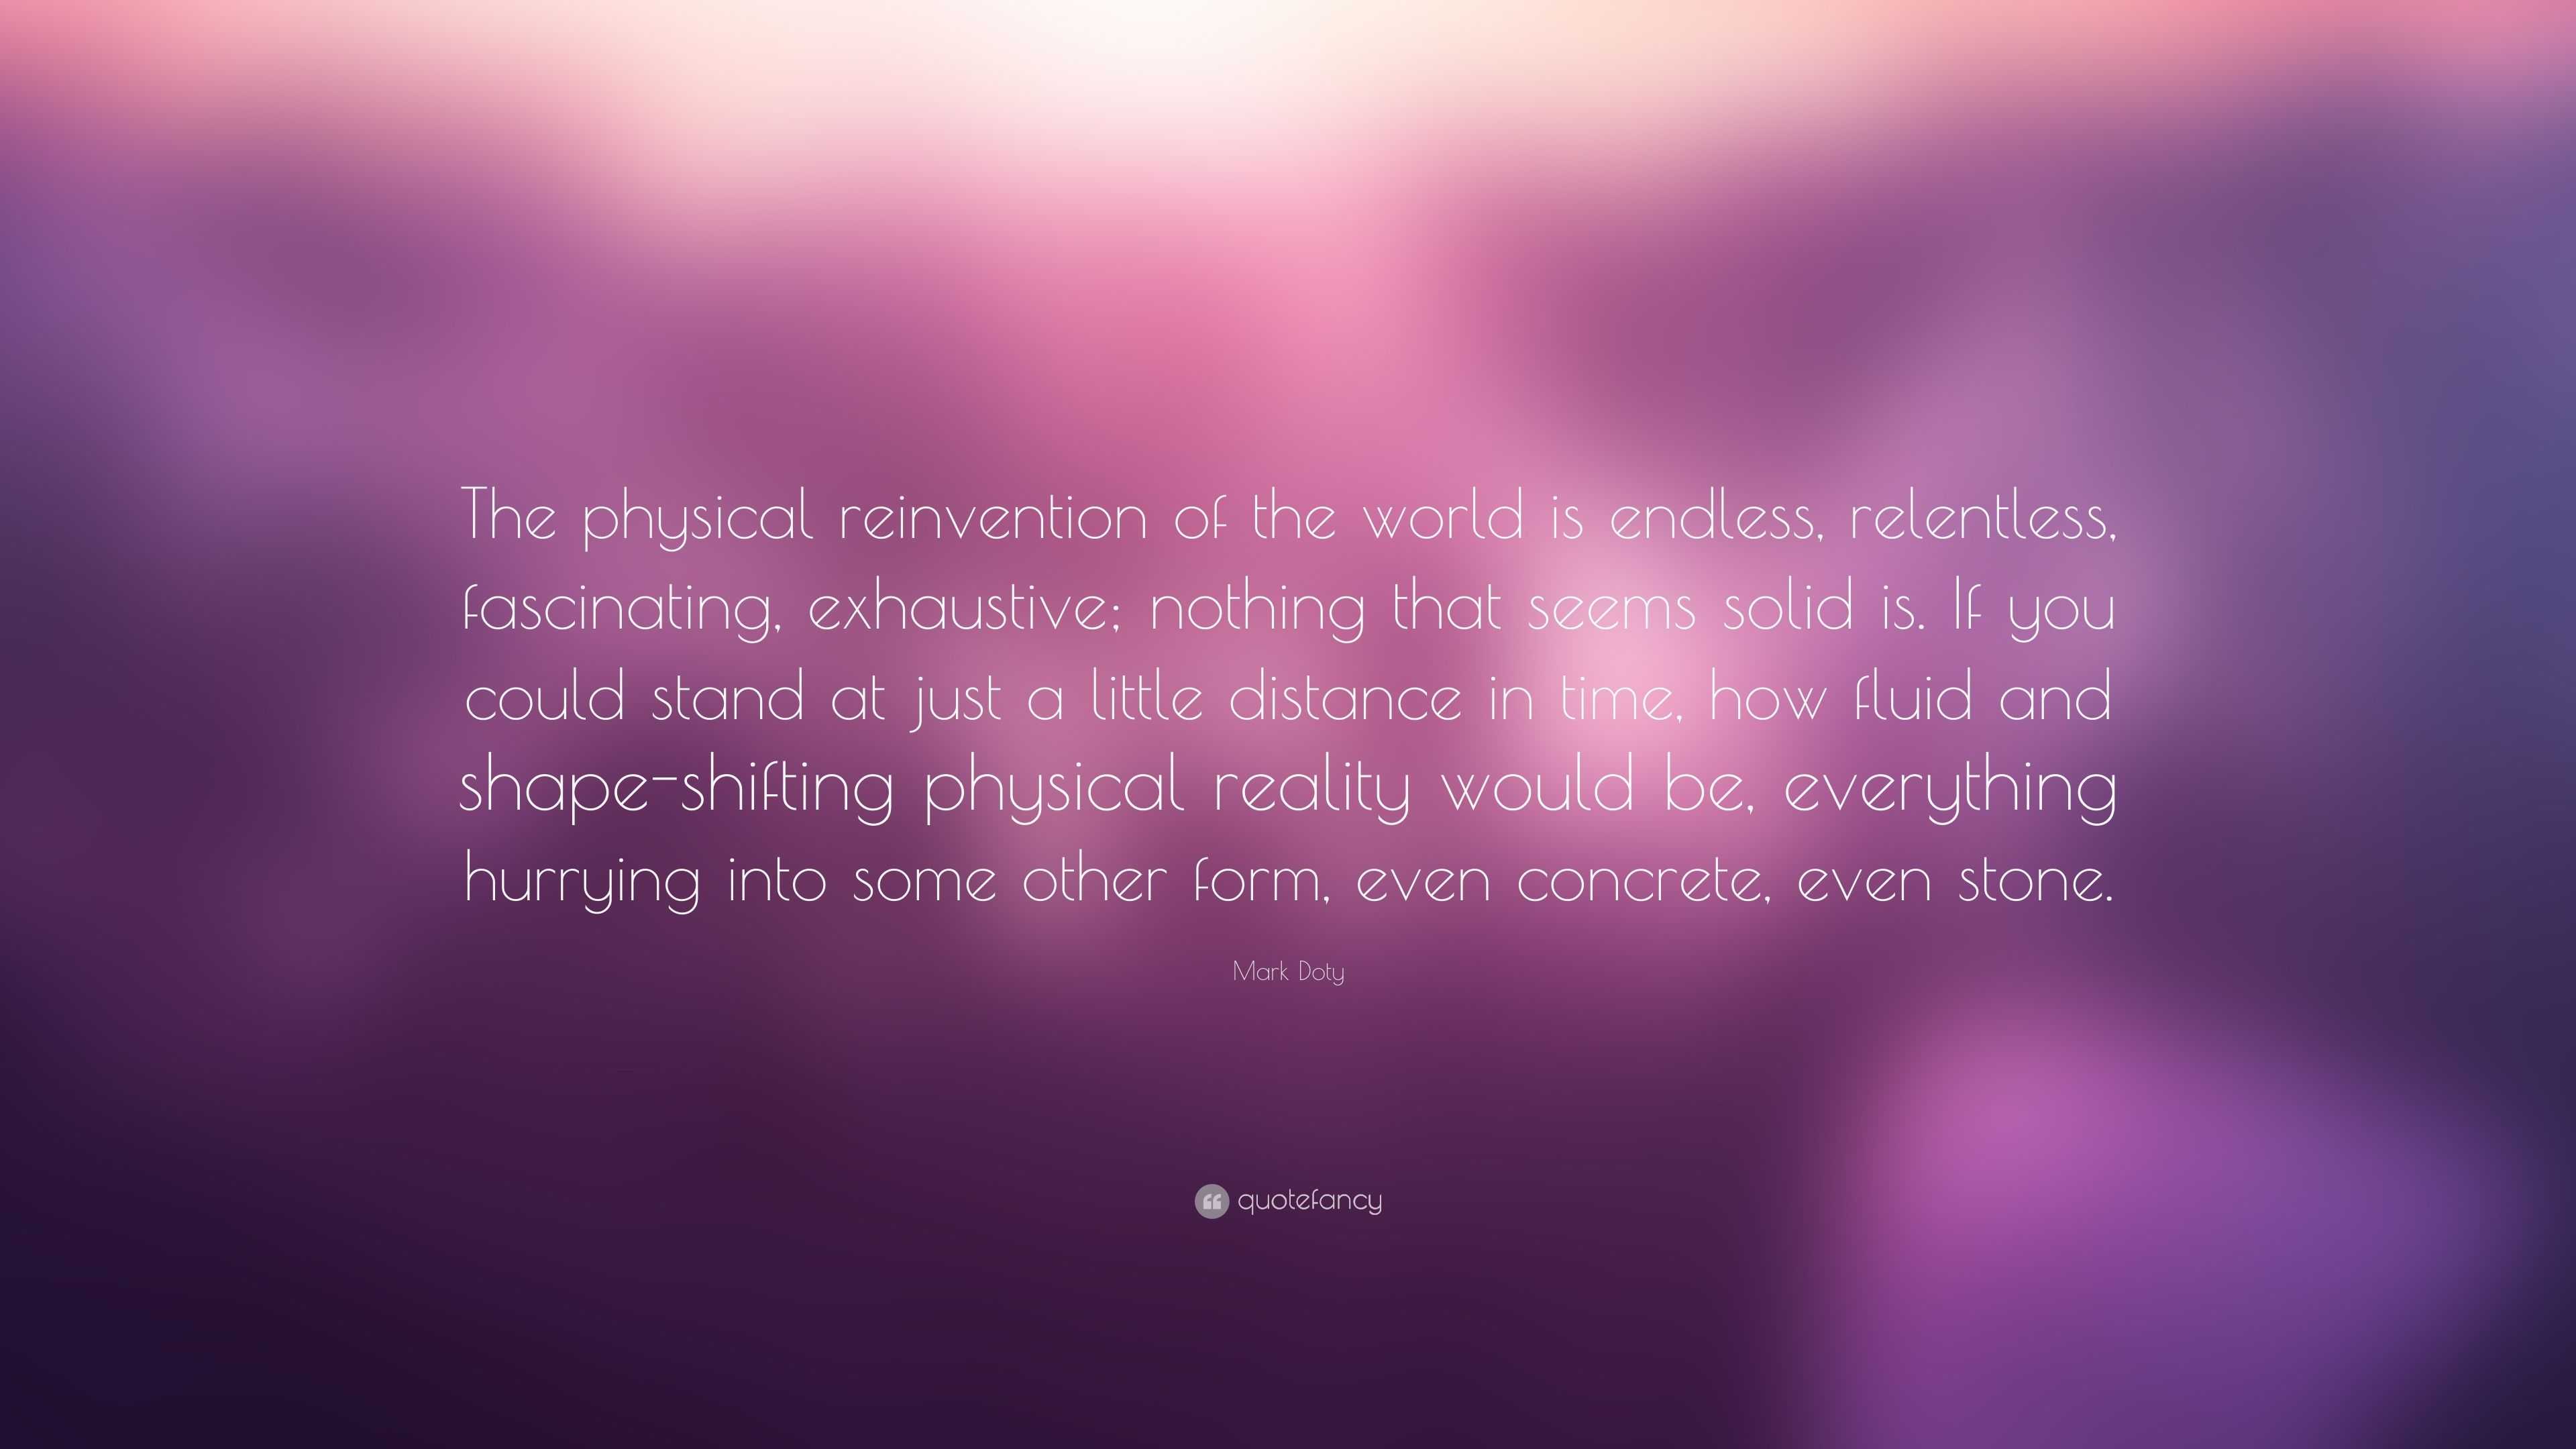 Mark Doty Quote: “The physical reinvention of the world is endless ...